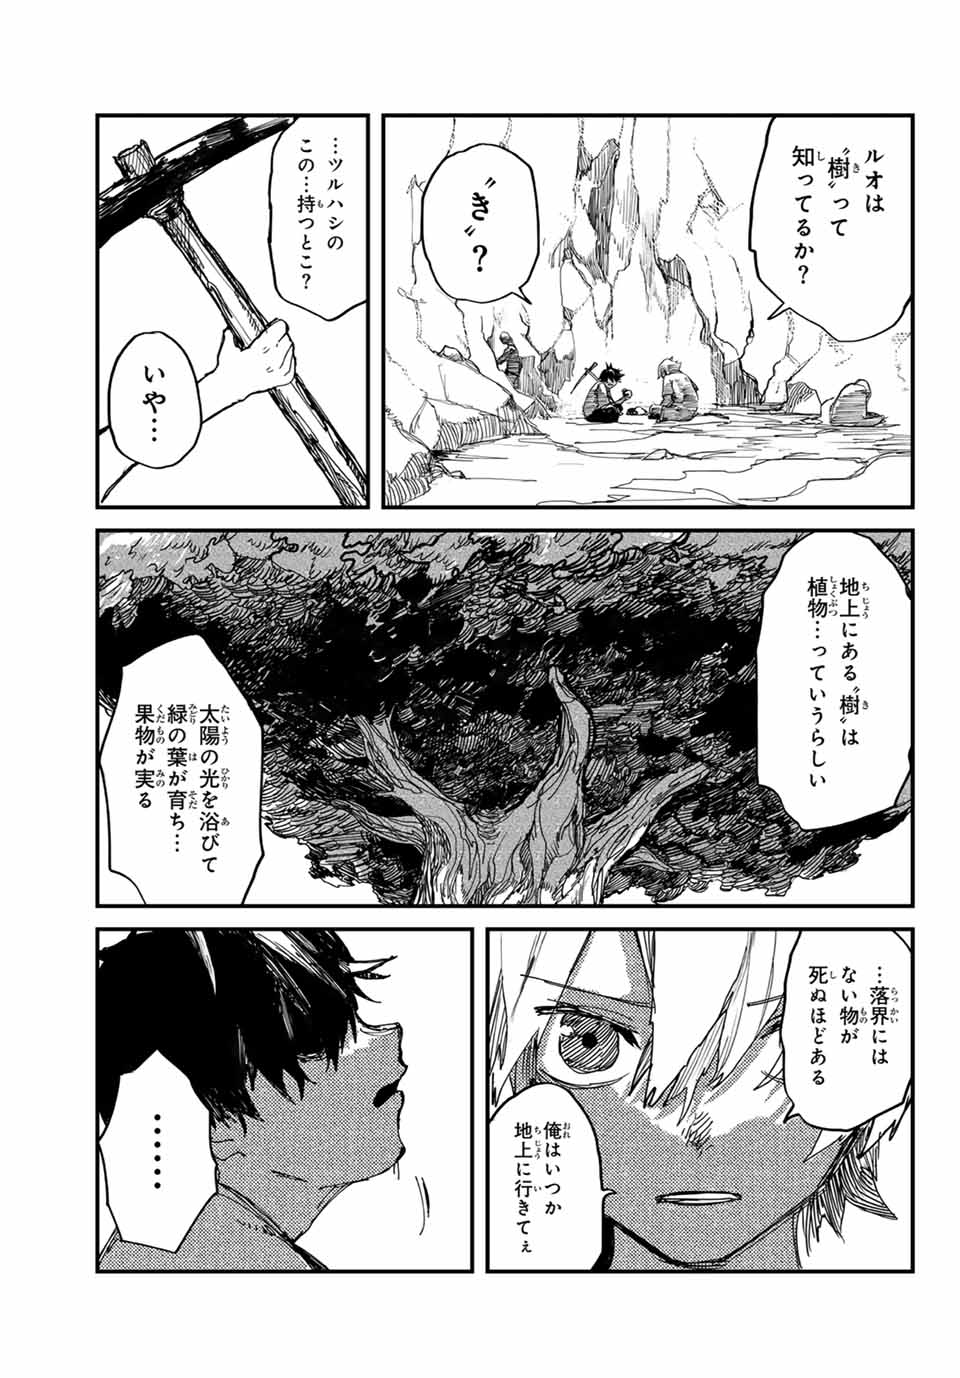 MAN OF RUST 第1.1話 - Page 15